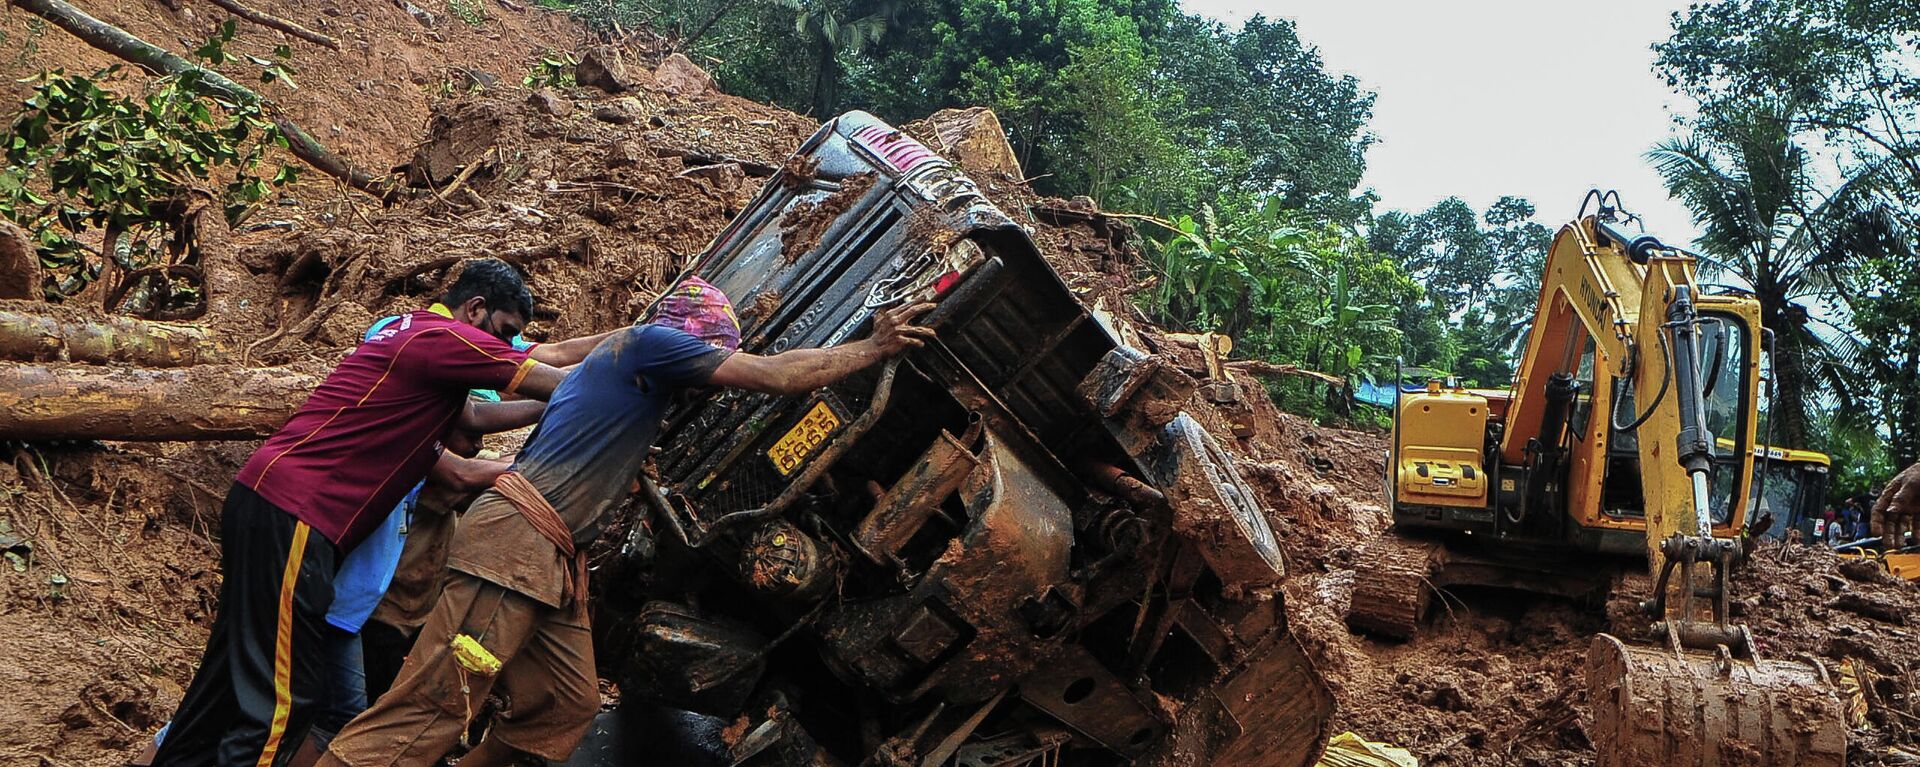 Rescue workers push a overturned vehicle stuck in the mud and debris at a site of a landslide claimed to be caused by heavy rains in Kokkayar in India's Kerala state on October 17, 2021 - Sputnik International, 1920, 18.10.2021